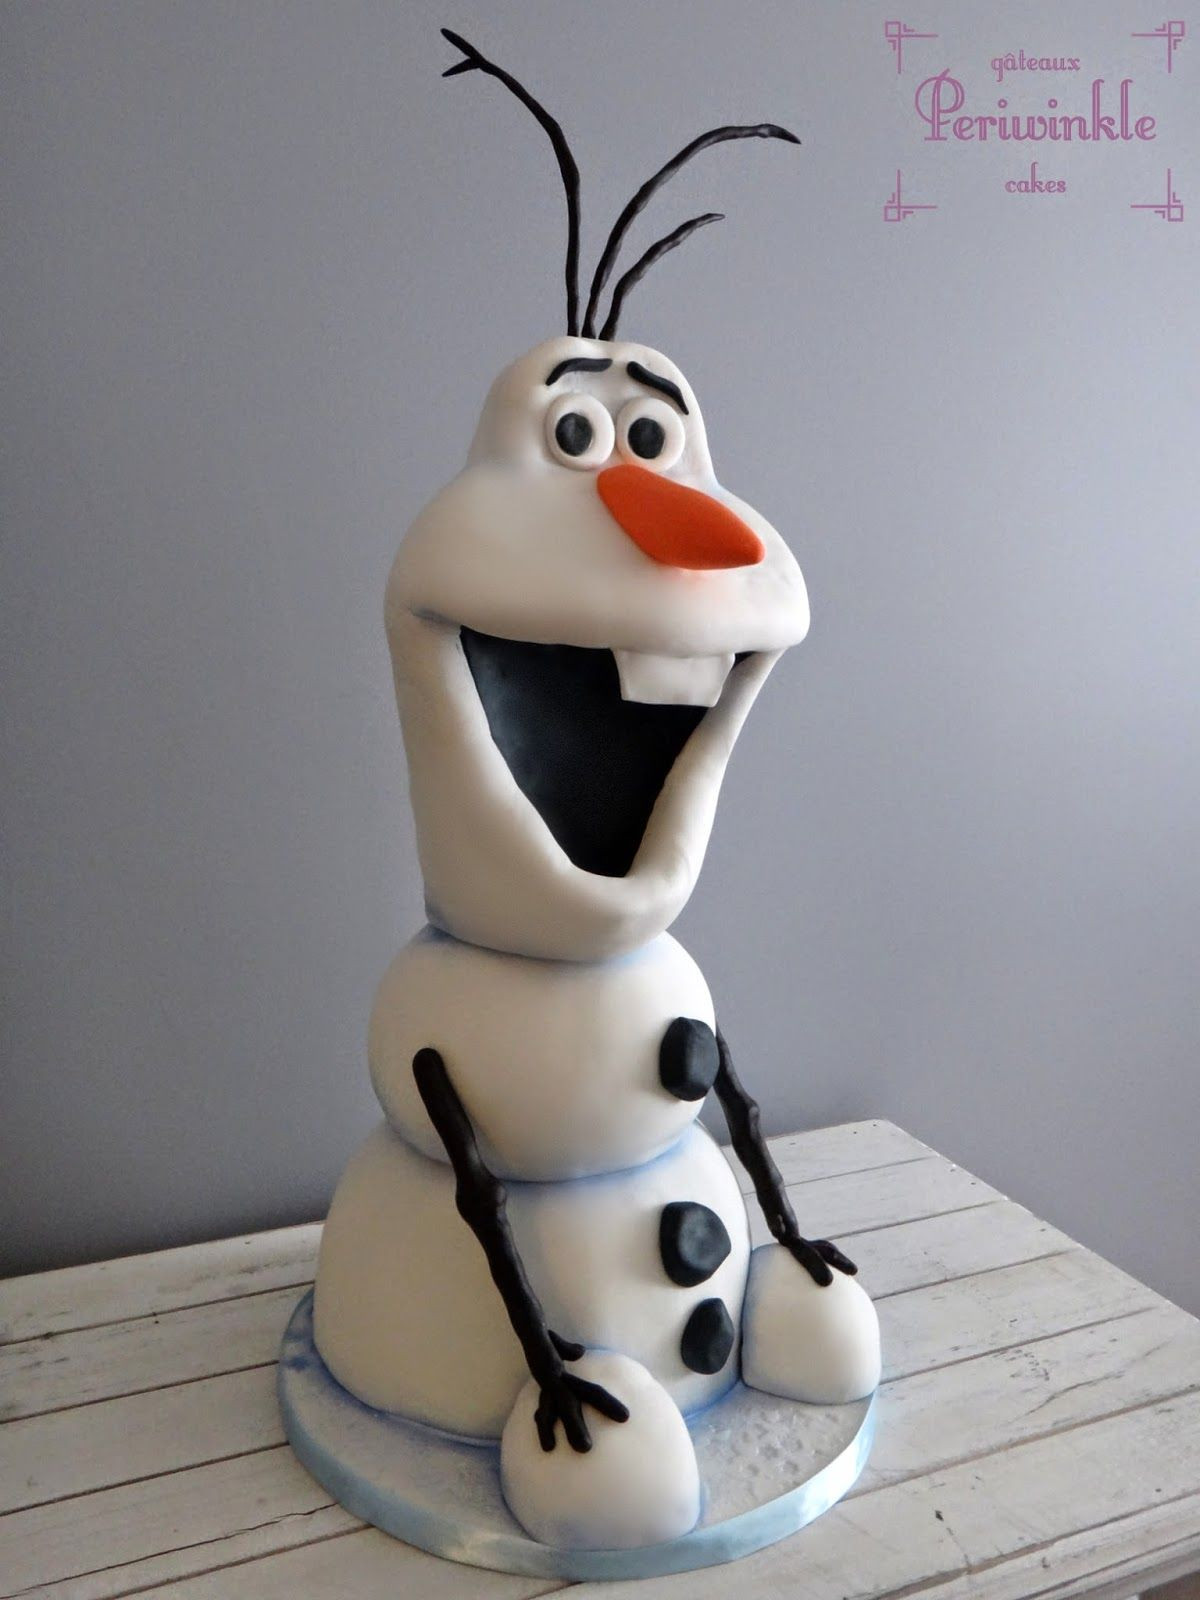 Olaf Birthday Cake Ideas
 Frozen s Olaf cake n I have for my 25th I love him